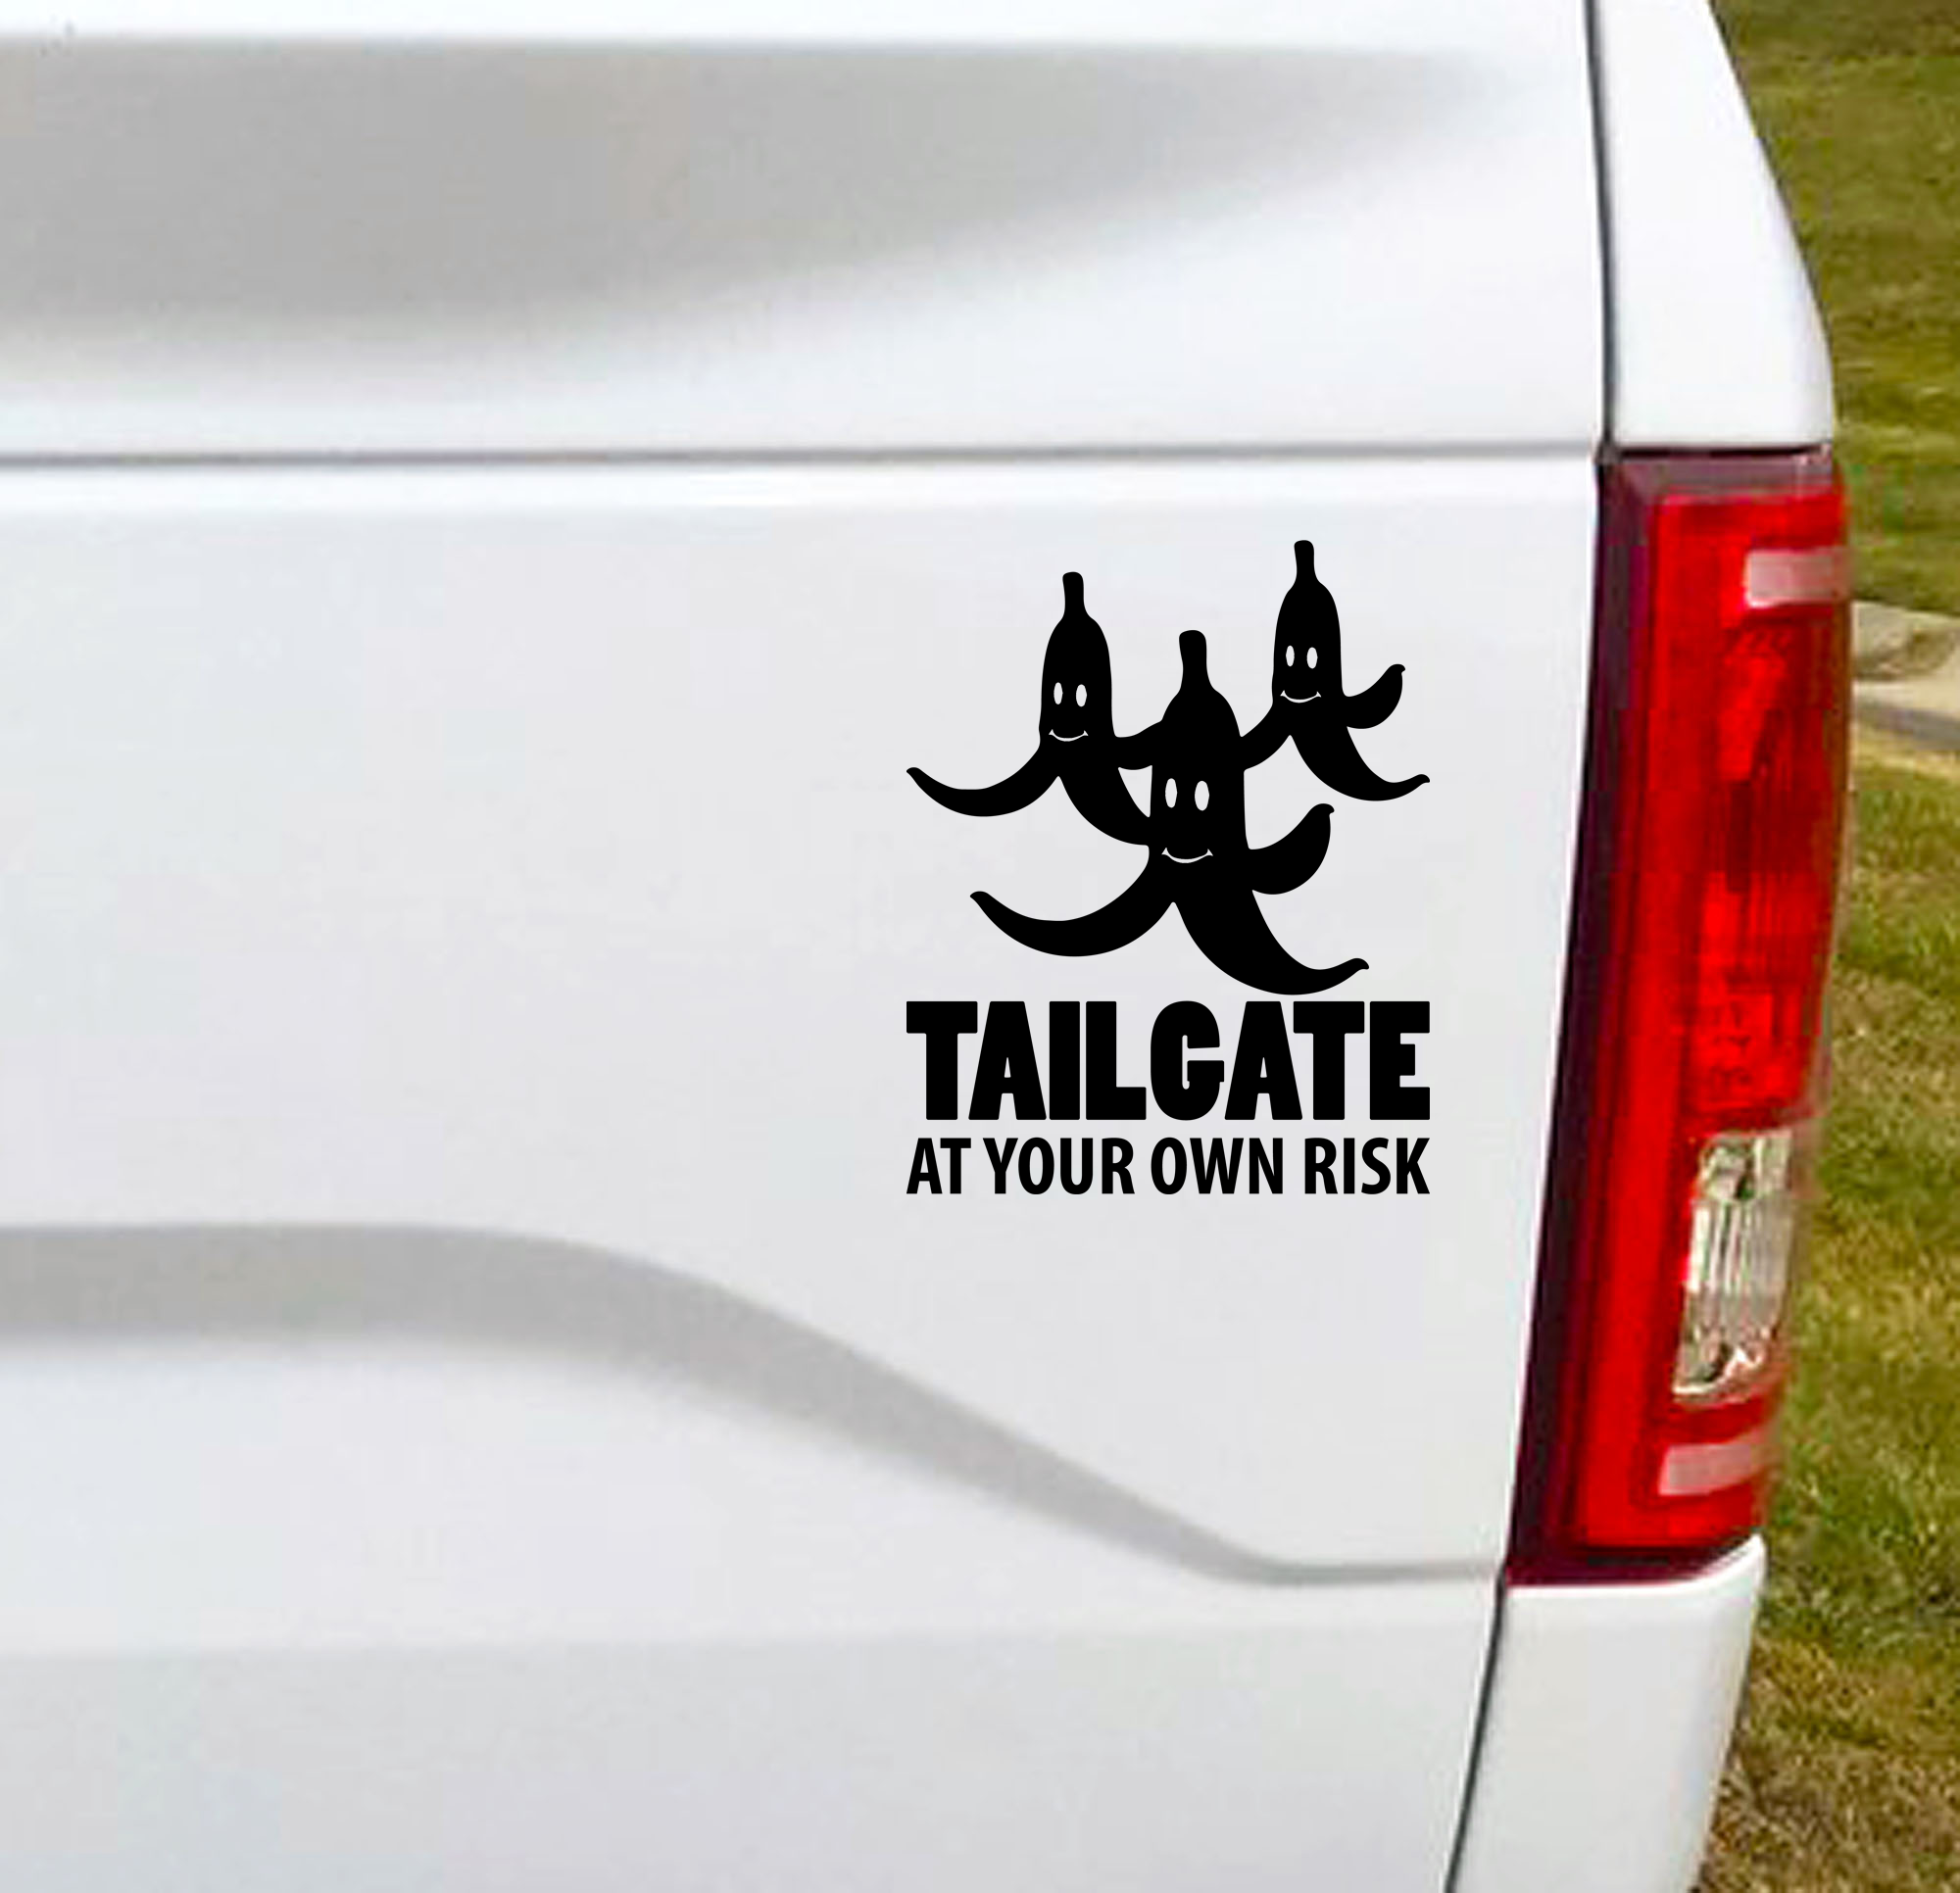 Tailgate at your own risk funny vinyl car decal. Let the drivers behind you know you don't like tailgaters with a little sarcastic humor.  5"W x 6"H Funny Car Decal, Car Sticker, Car Vinyl, Bumper Sticker, Vinyl Stickers, Vinyl Sticker.